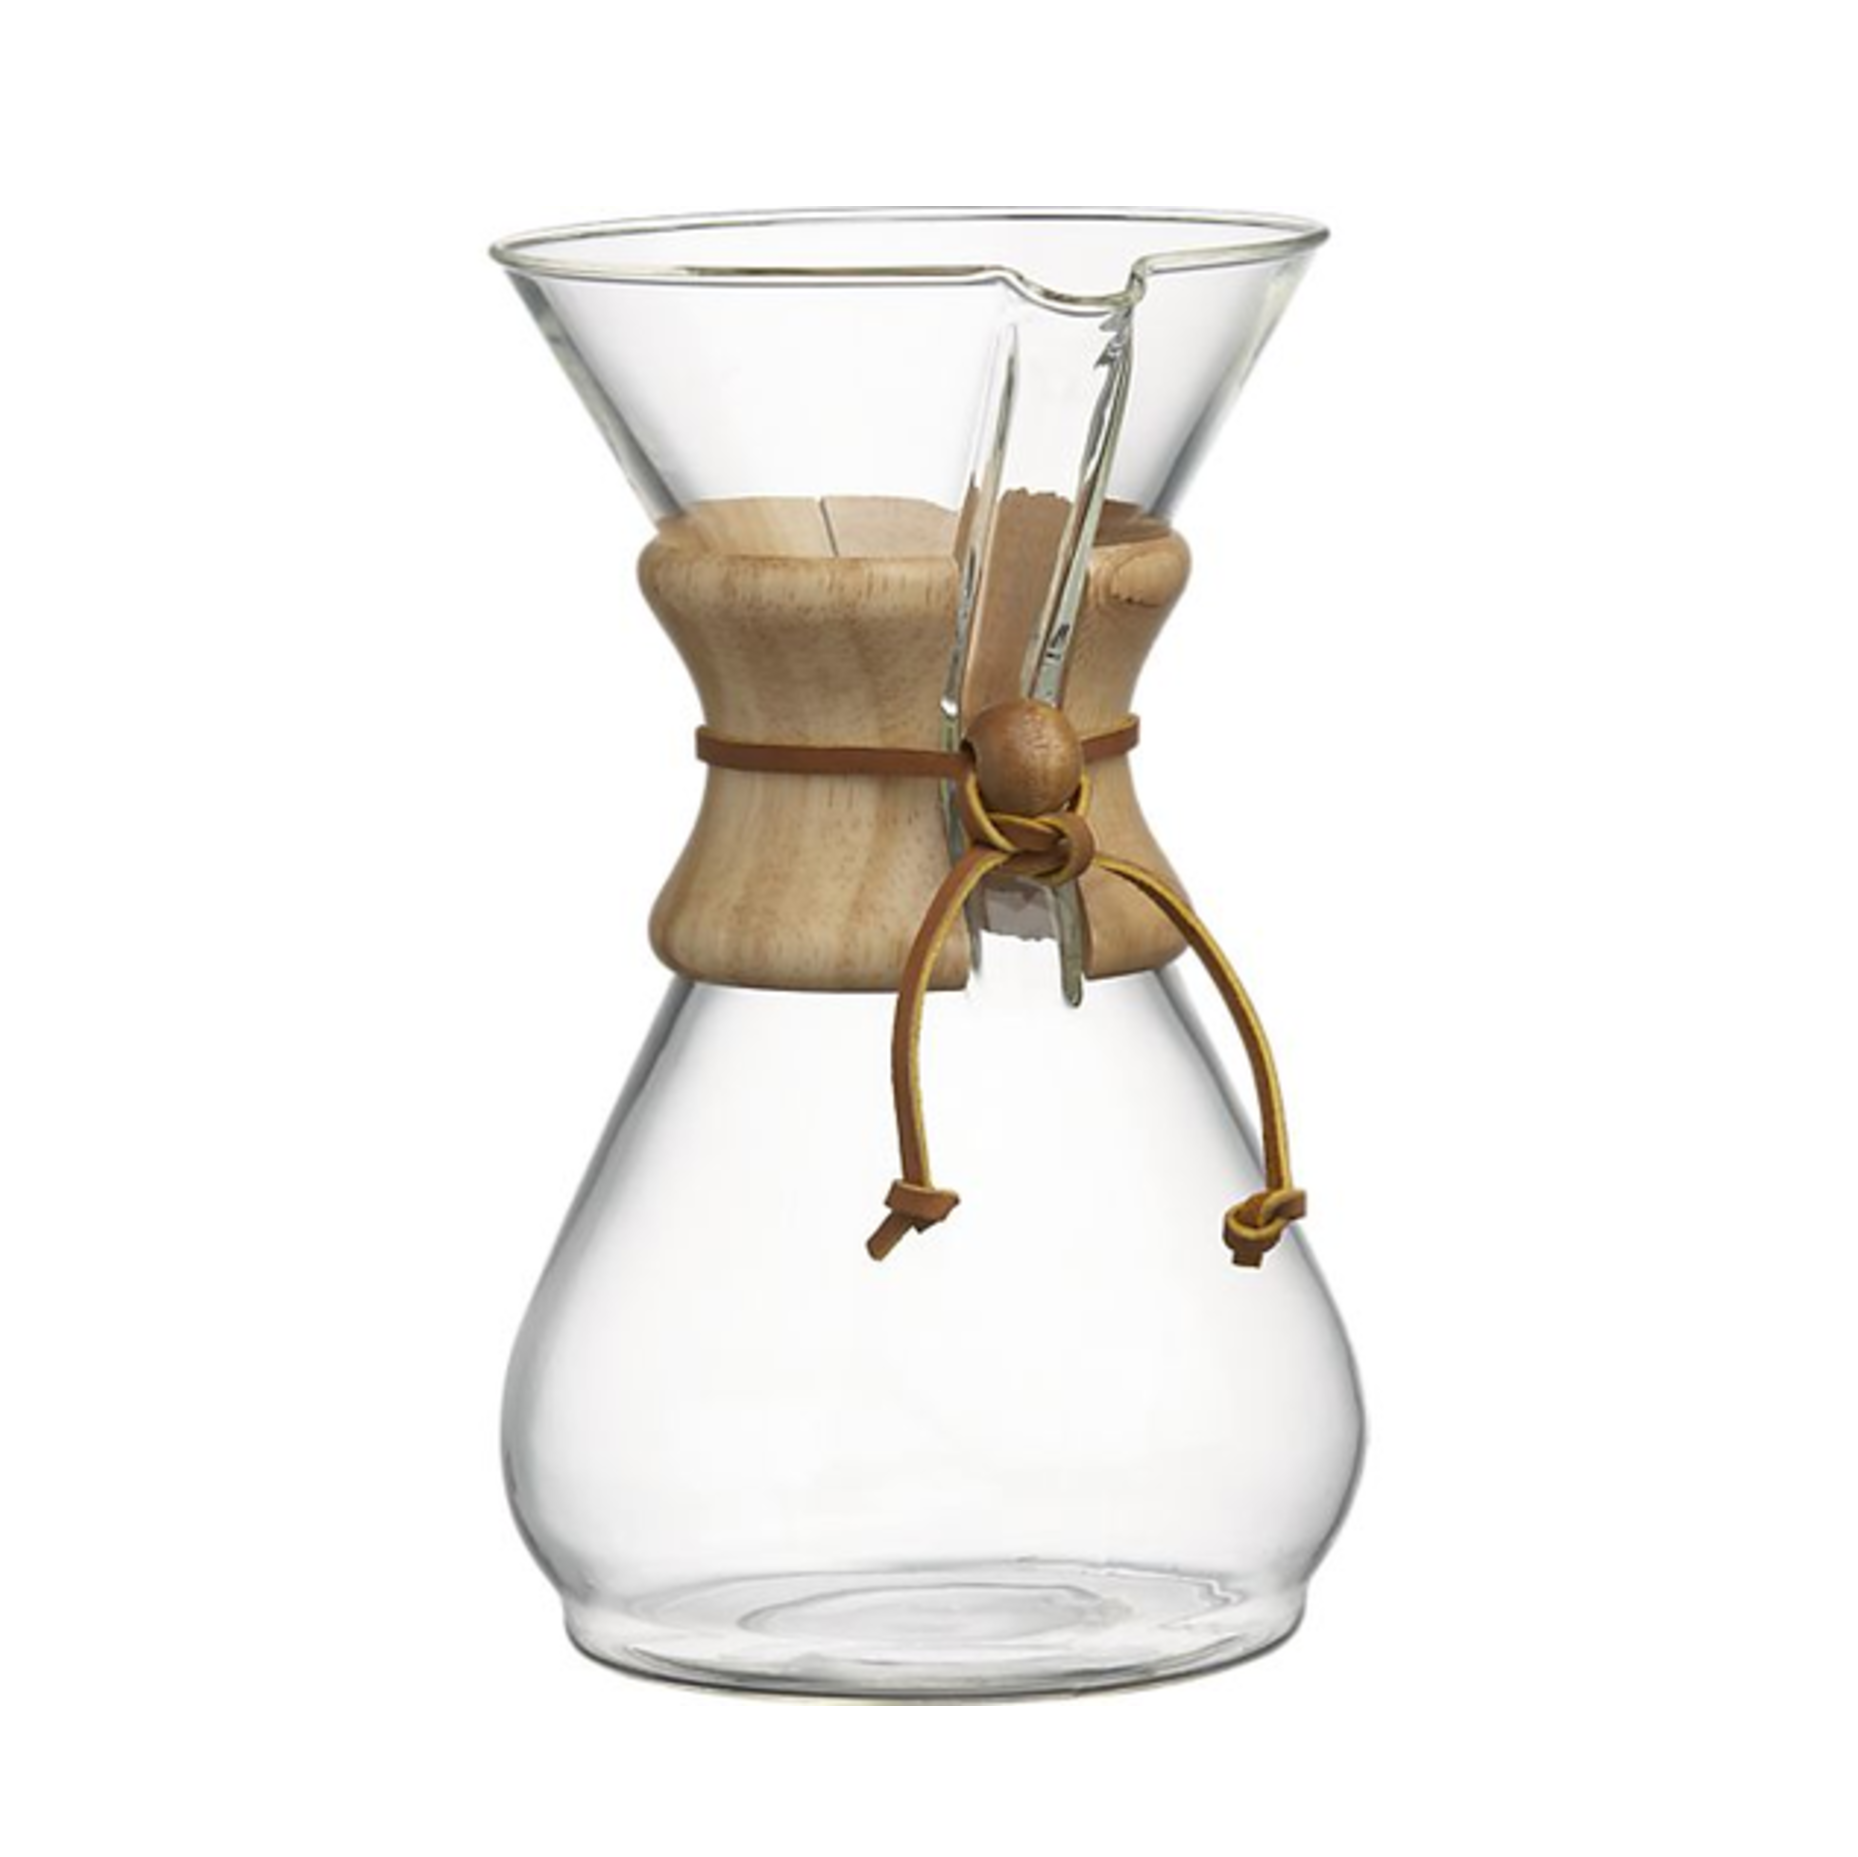 Chemex Glass Pour-over Coffee Maker, 6 Cup or 8 Cup